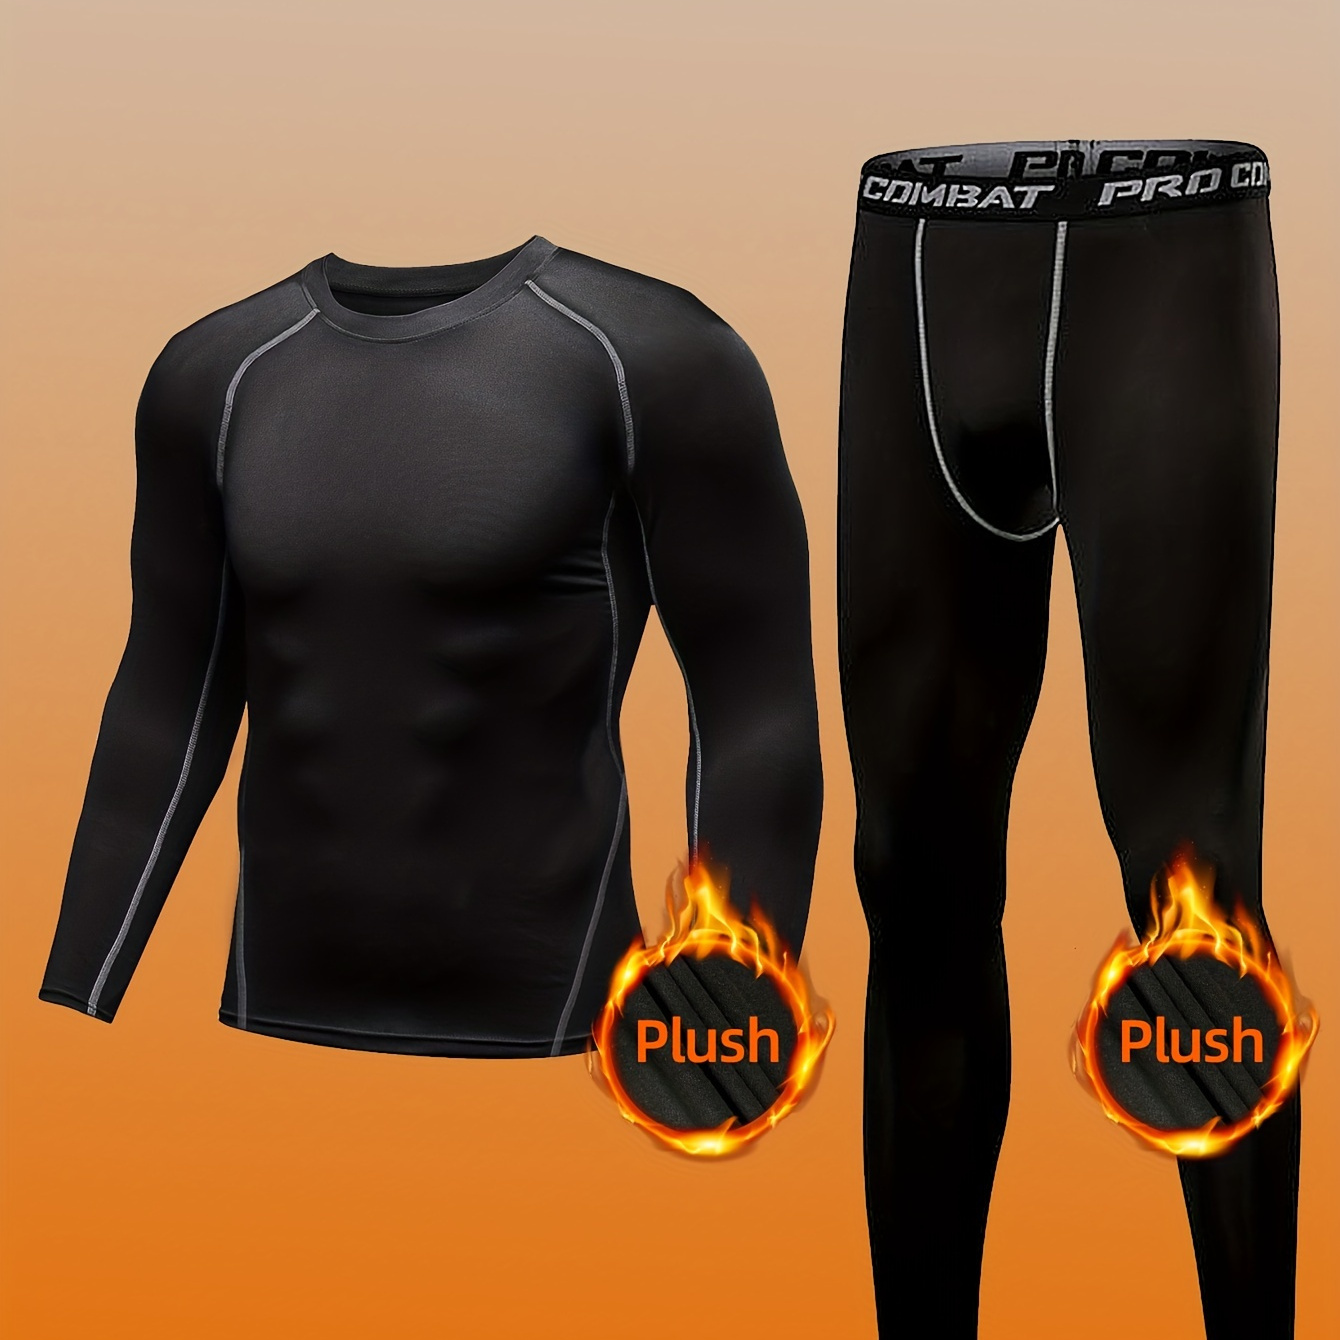 

Men's Thermal Underwear Set, Skiing Autumn Warm Base Layers, Tight Long Sleeve Round Neck Top & Bottom Pants Without Pee Hole